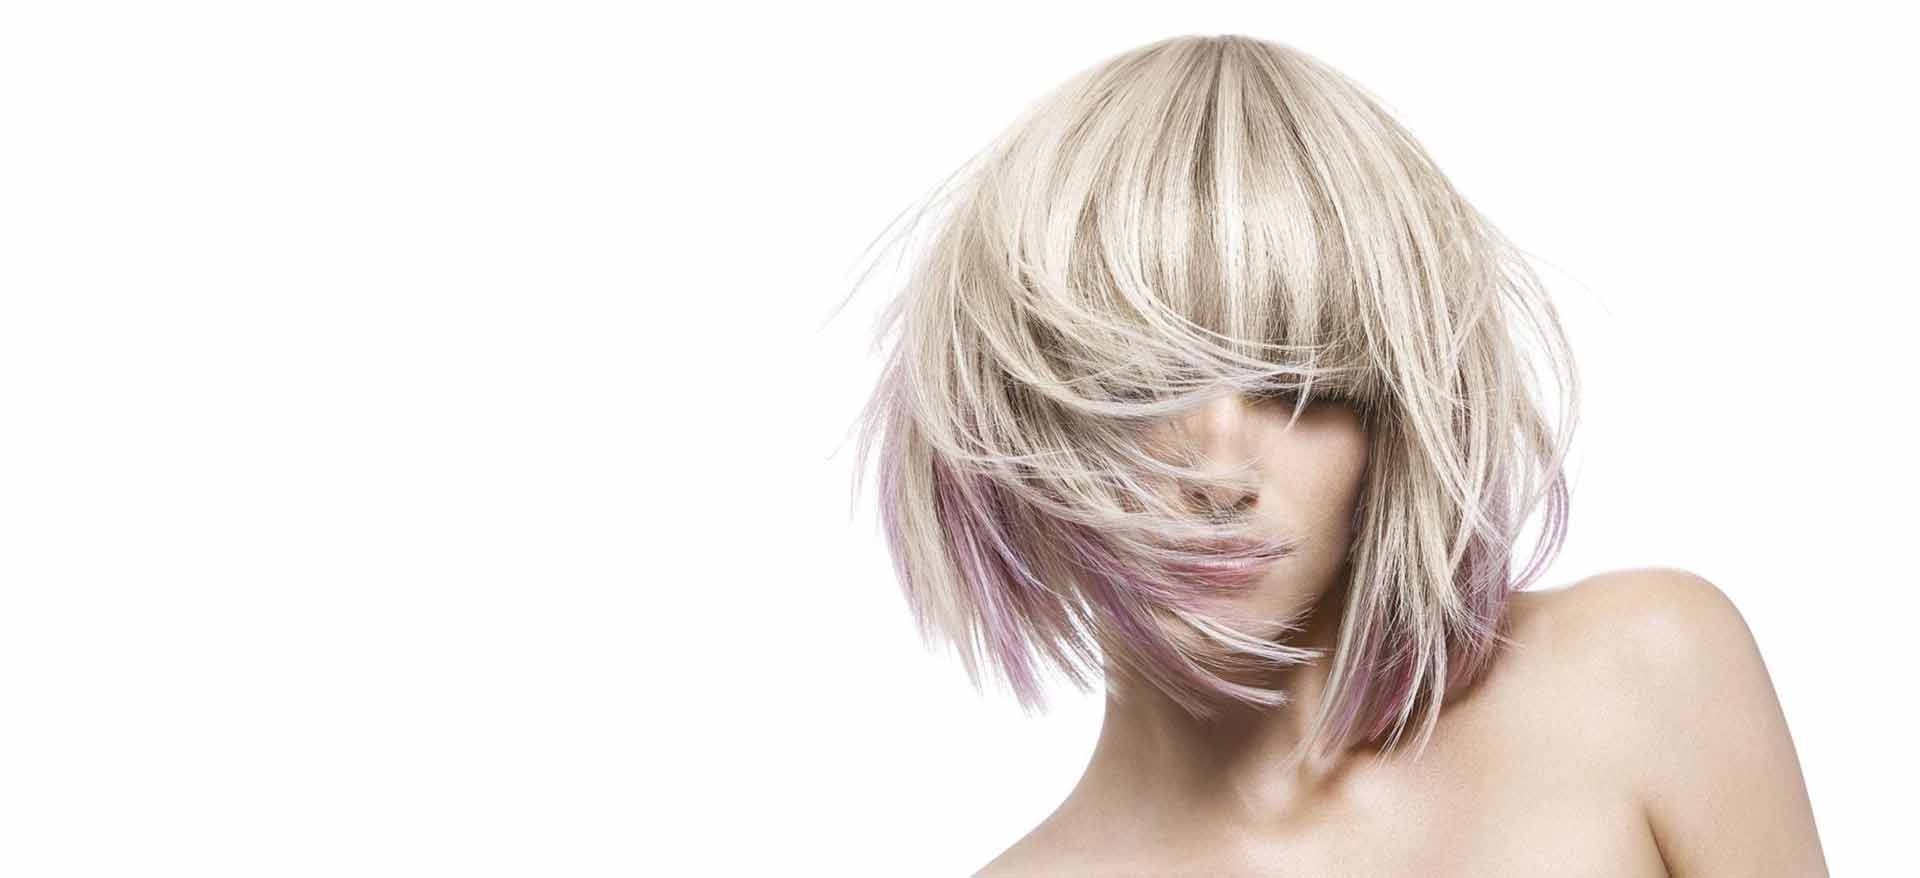 Discover your style in 2018 | Revolution Hair & Beauty in Paphos, Cyprus